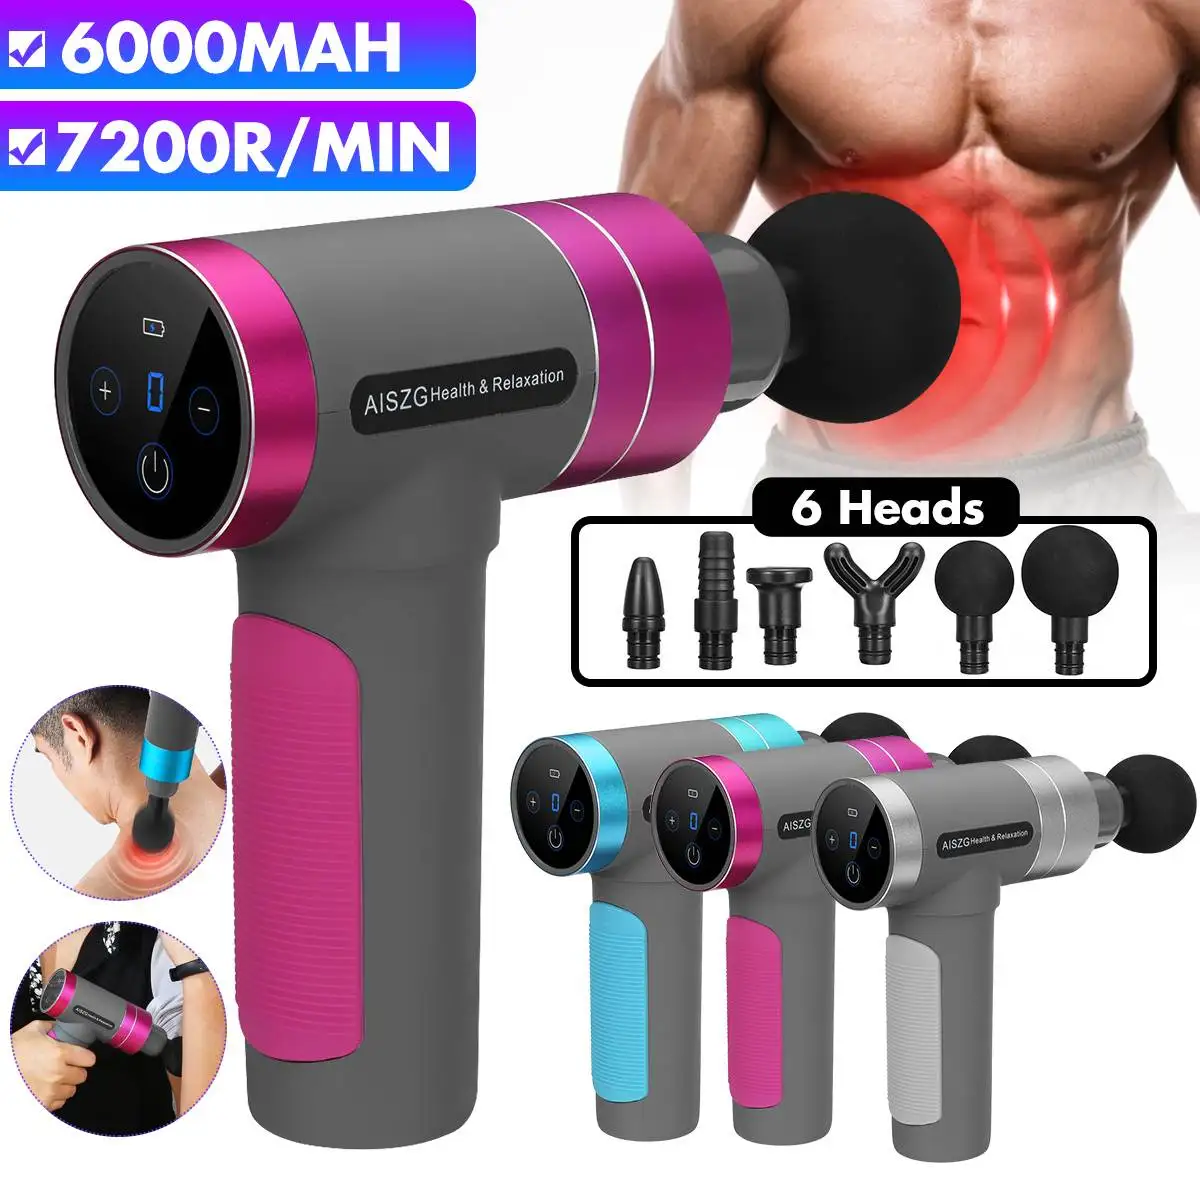 

Muscle Massage Gun 7200r/min Profession Sport Therapy Massager Body Relaxation Pain Relief Slimming Shaping Massager 6 Heads